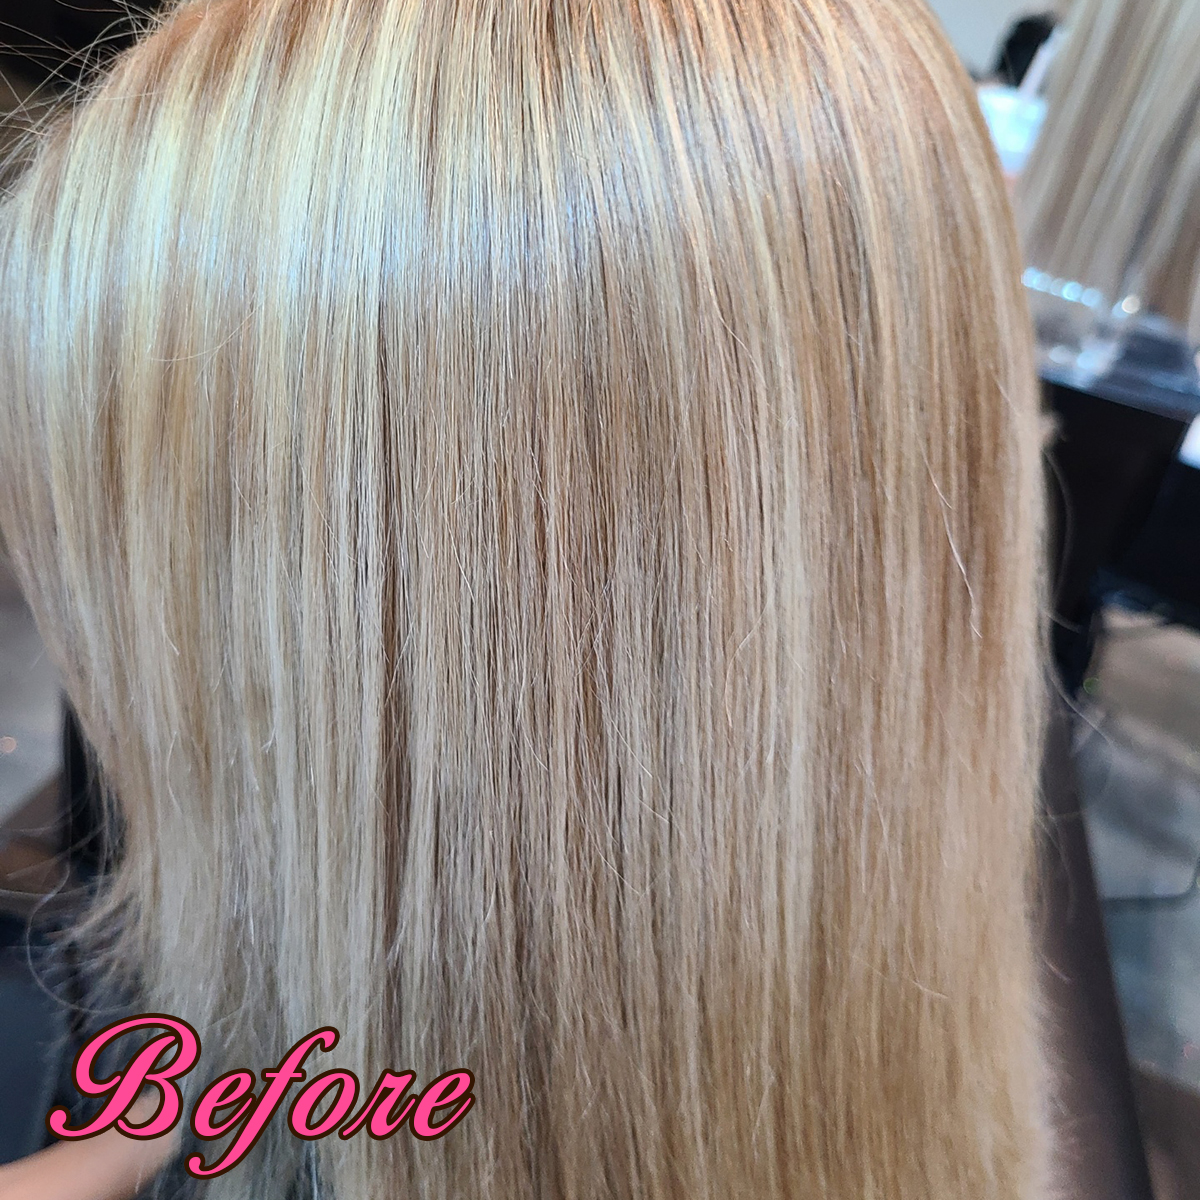 Gallery 103 - Before - Hair Extensions by Gricelda